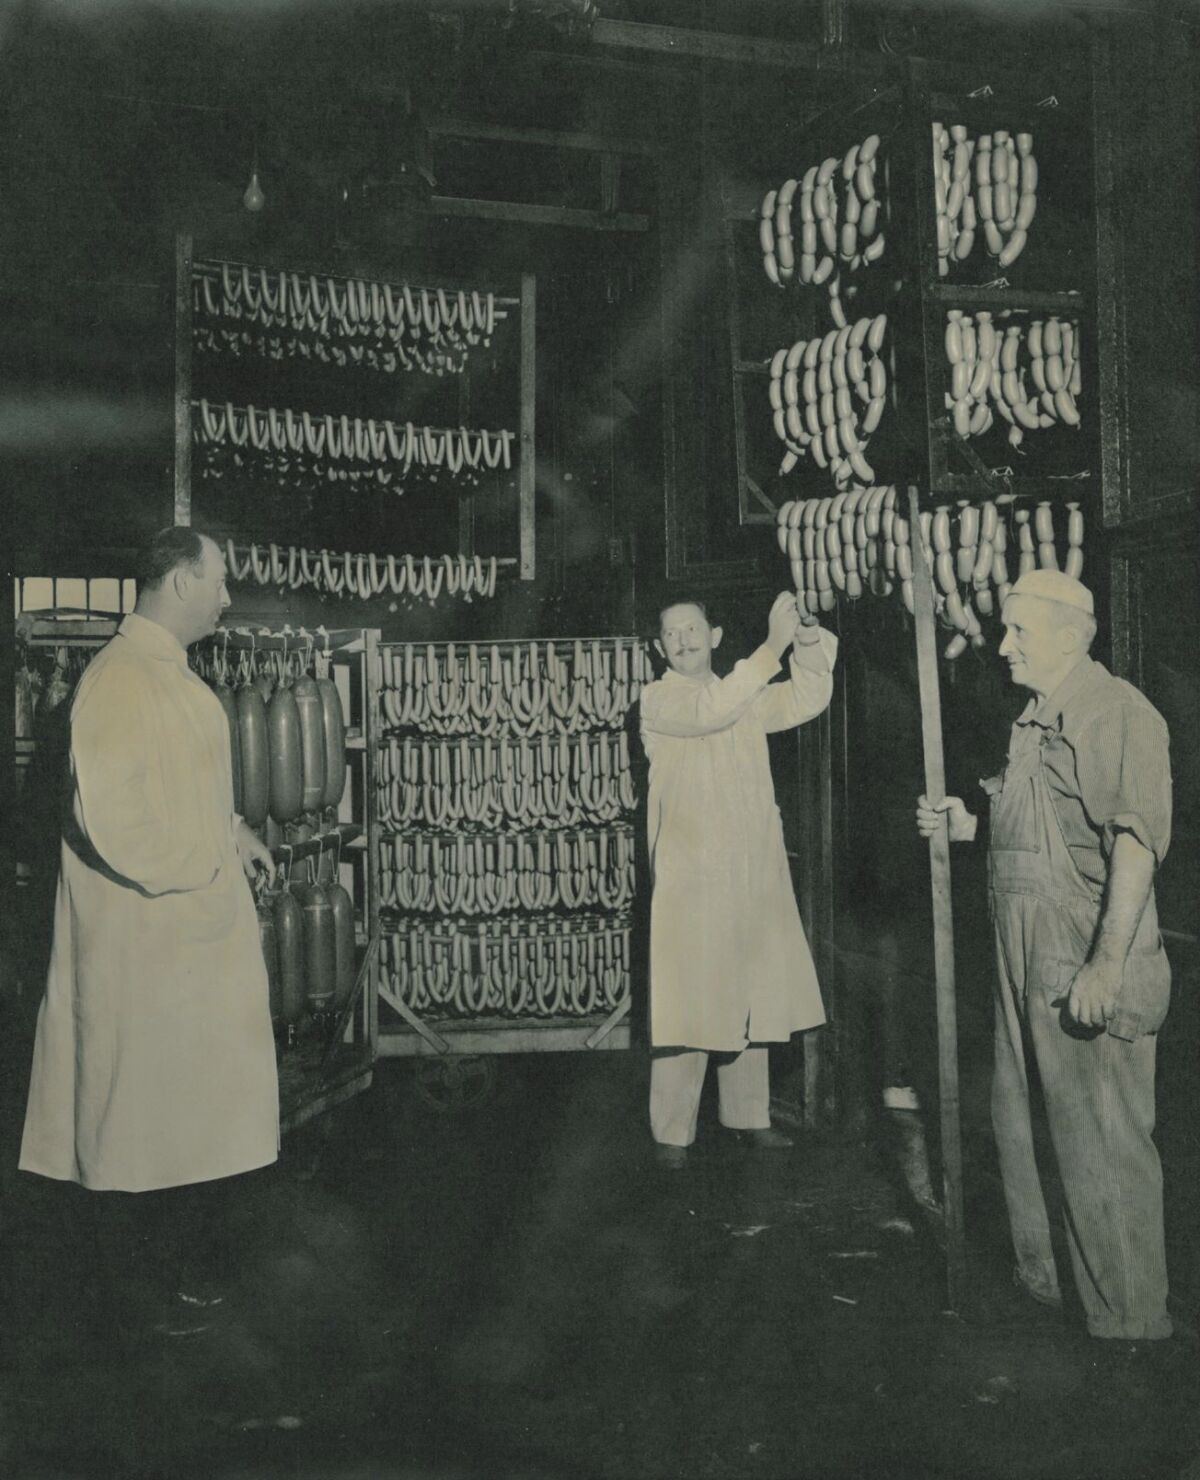 Sausage is inspected at a factory.